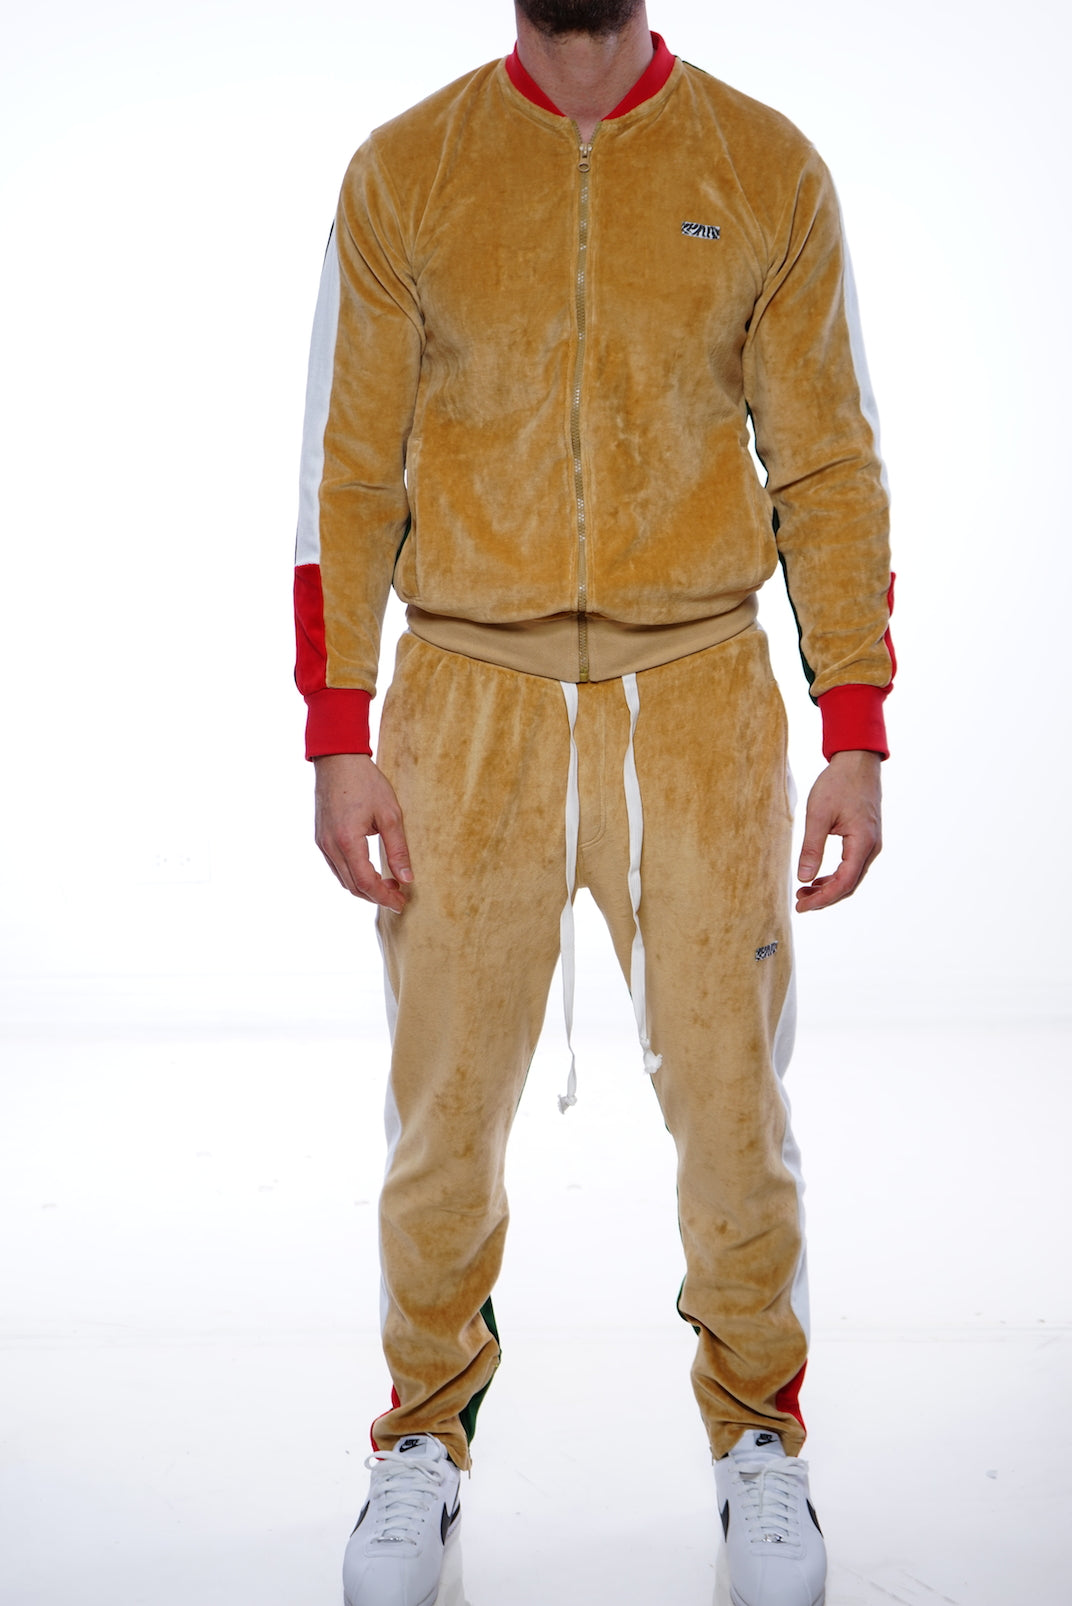 RichWierdo 2-Tone Velour Track Suit (Wheat) SOLD OUT